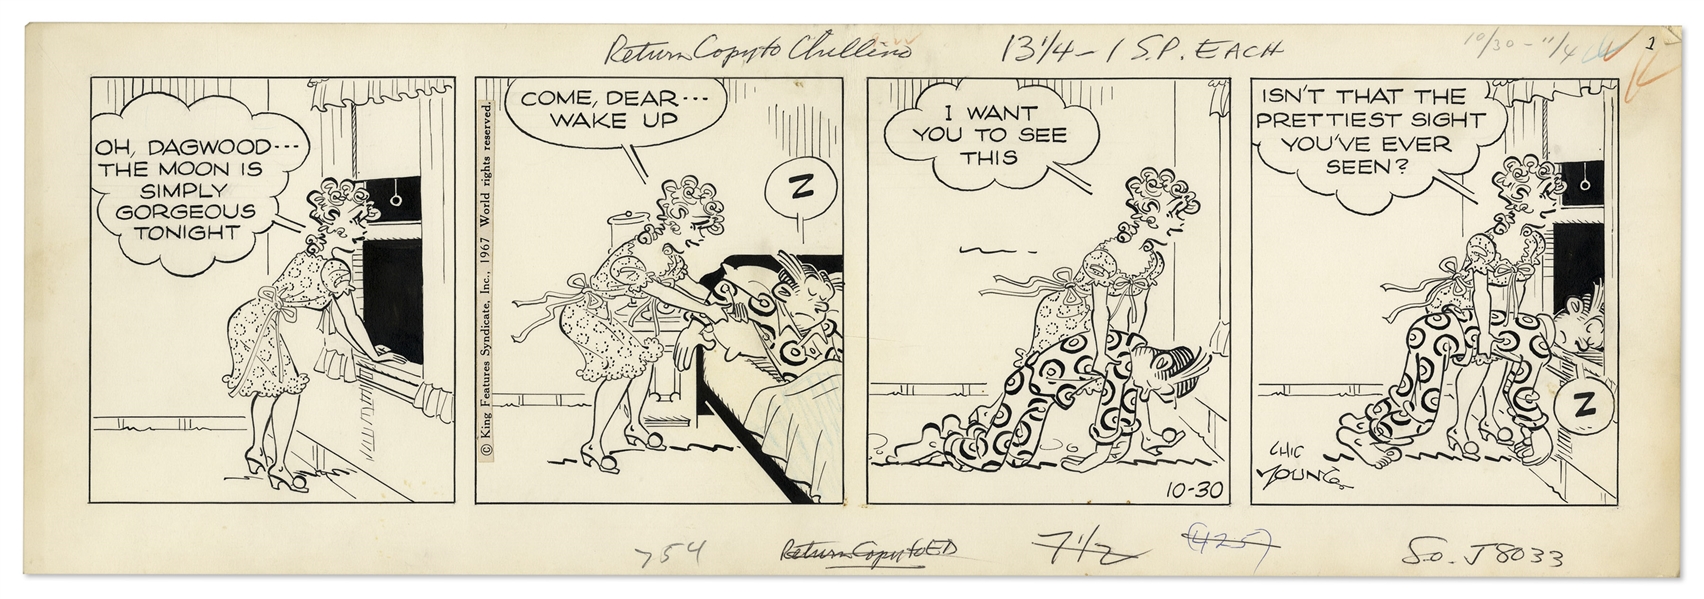 2 Chic Young Hand-Drawn ''Blondie'' Comic Strips From 1967 -- Plus Chic Young's Draft Artwork for Both Strips